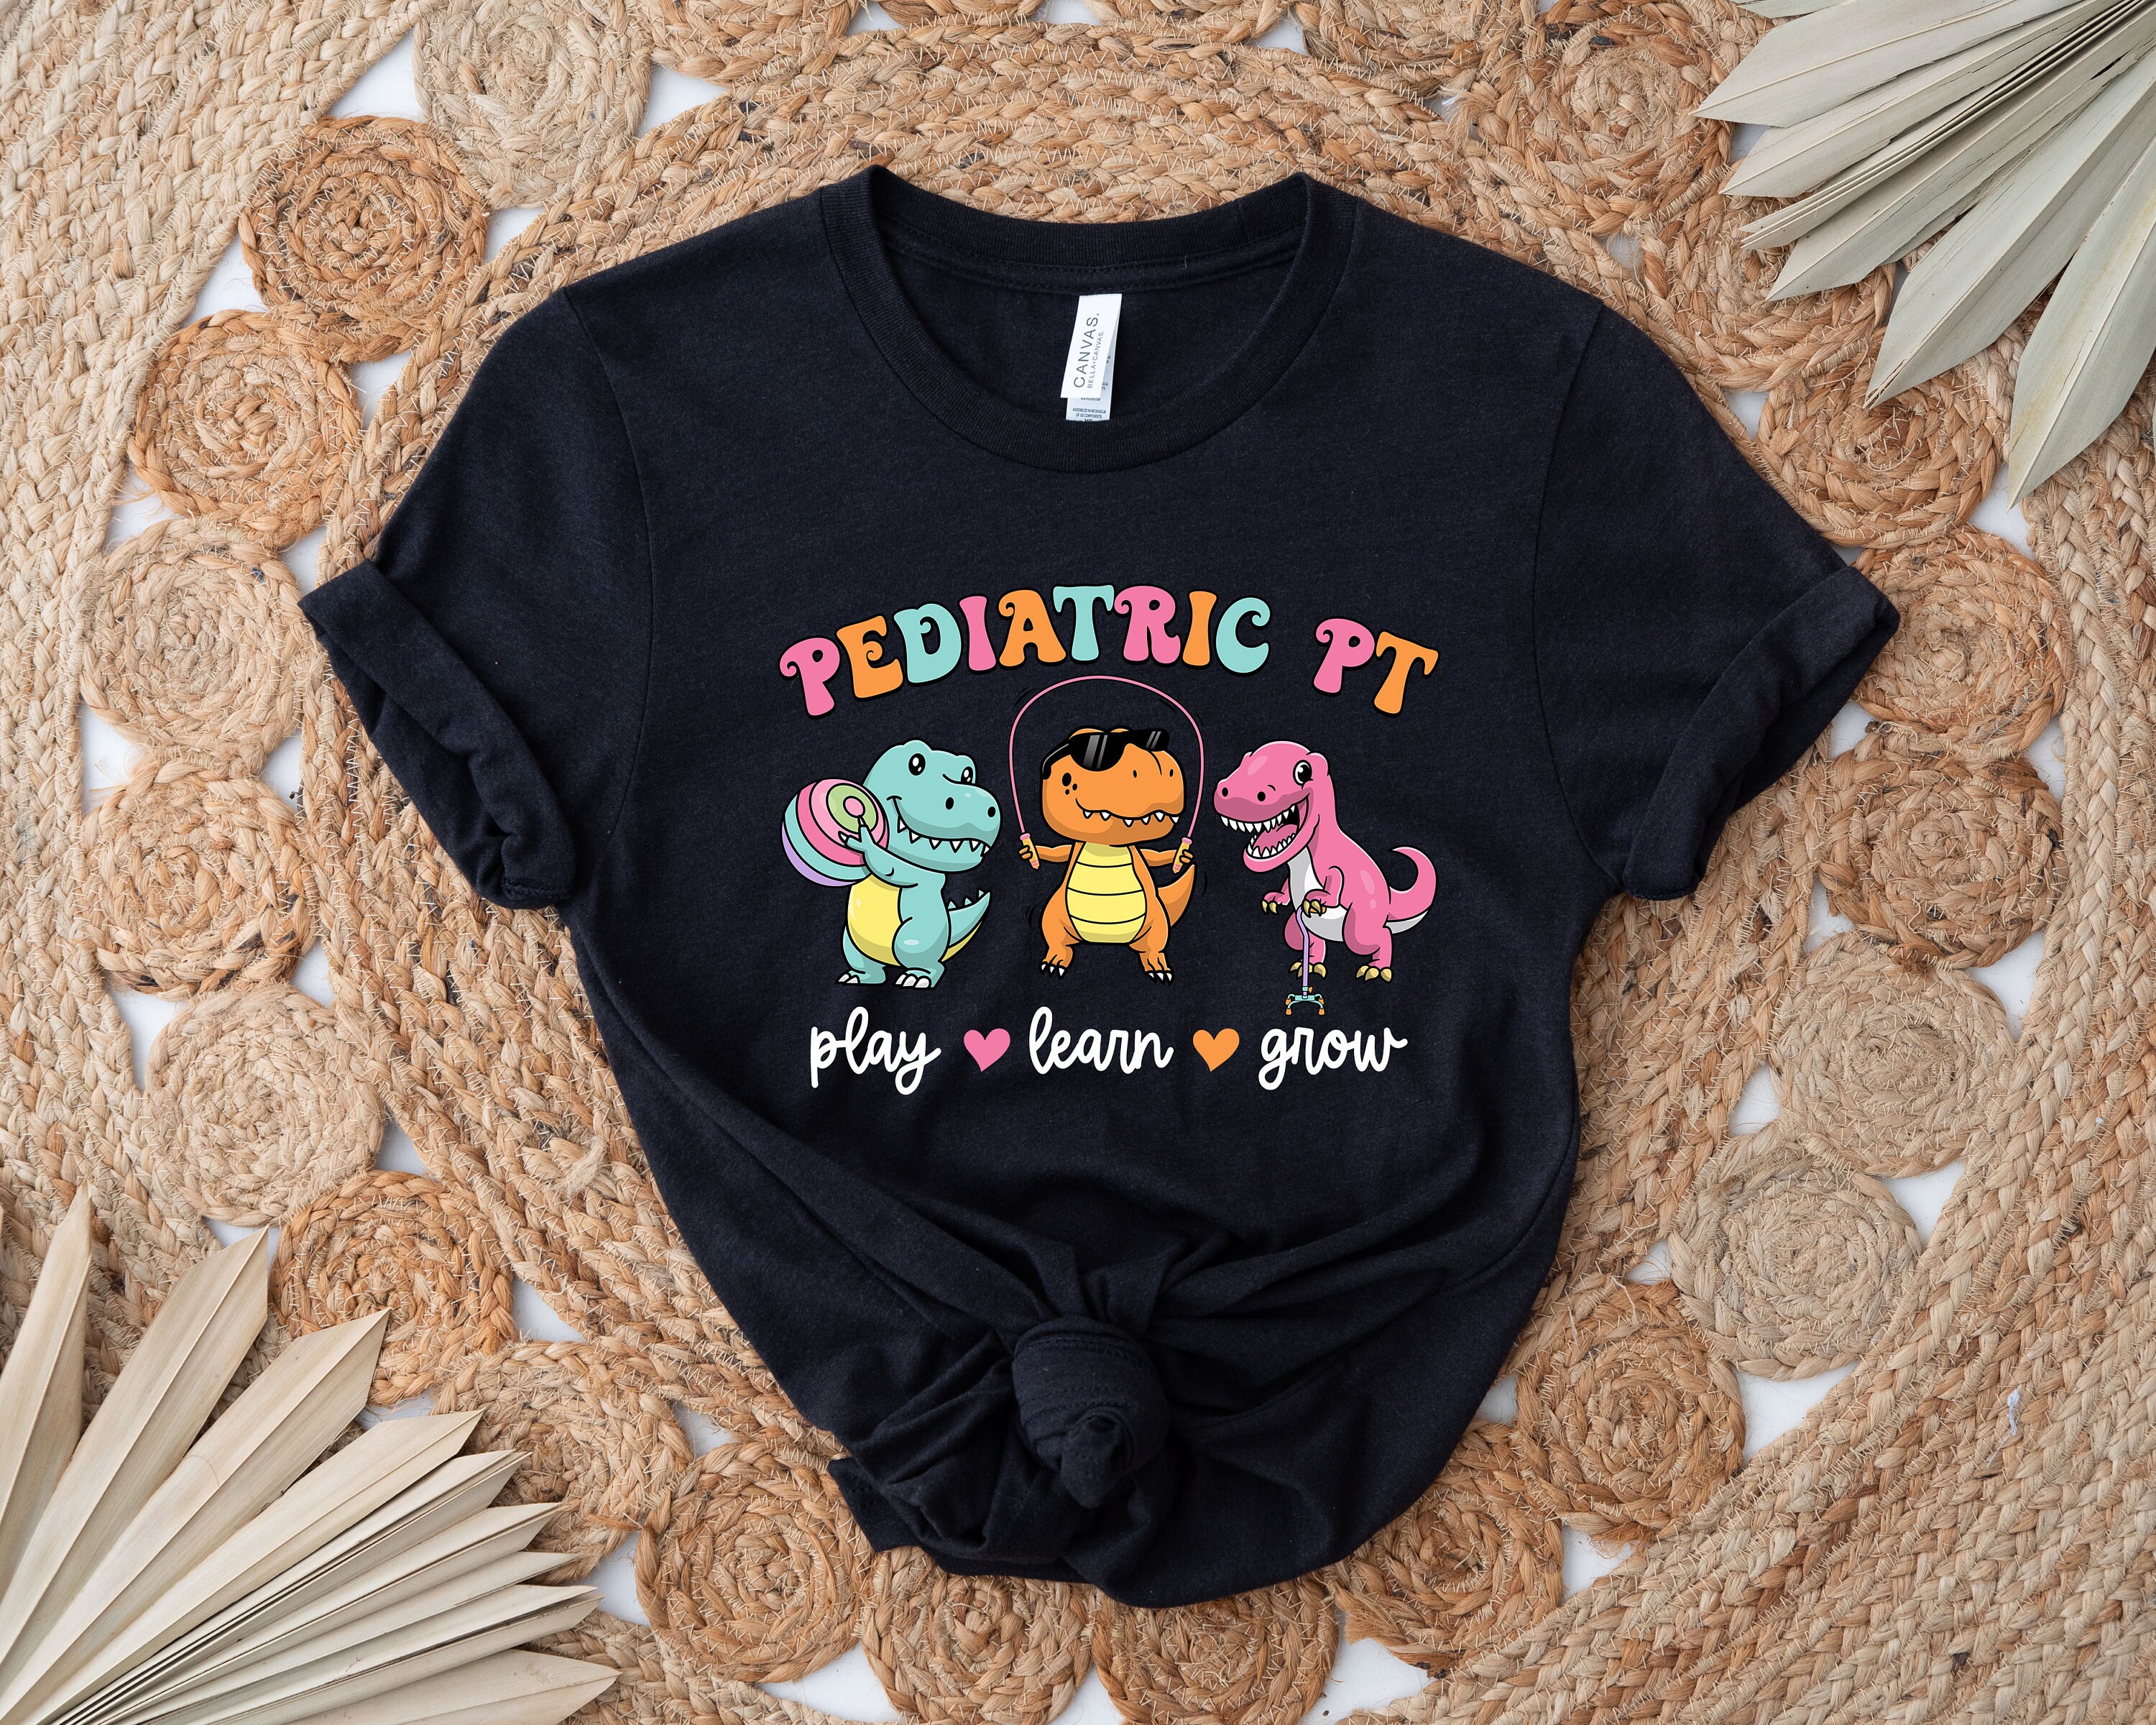 Discover Pediatric Physical Therapy, Pediatric PT Shirt, Ot Shirt, Therapy Shirt, Therapist Shirt, Occupational Outfit, Pediatric T-Shirt,